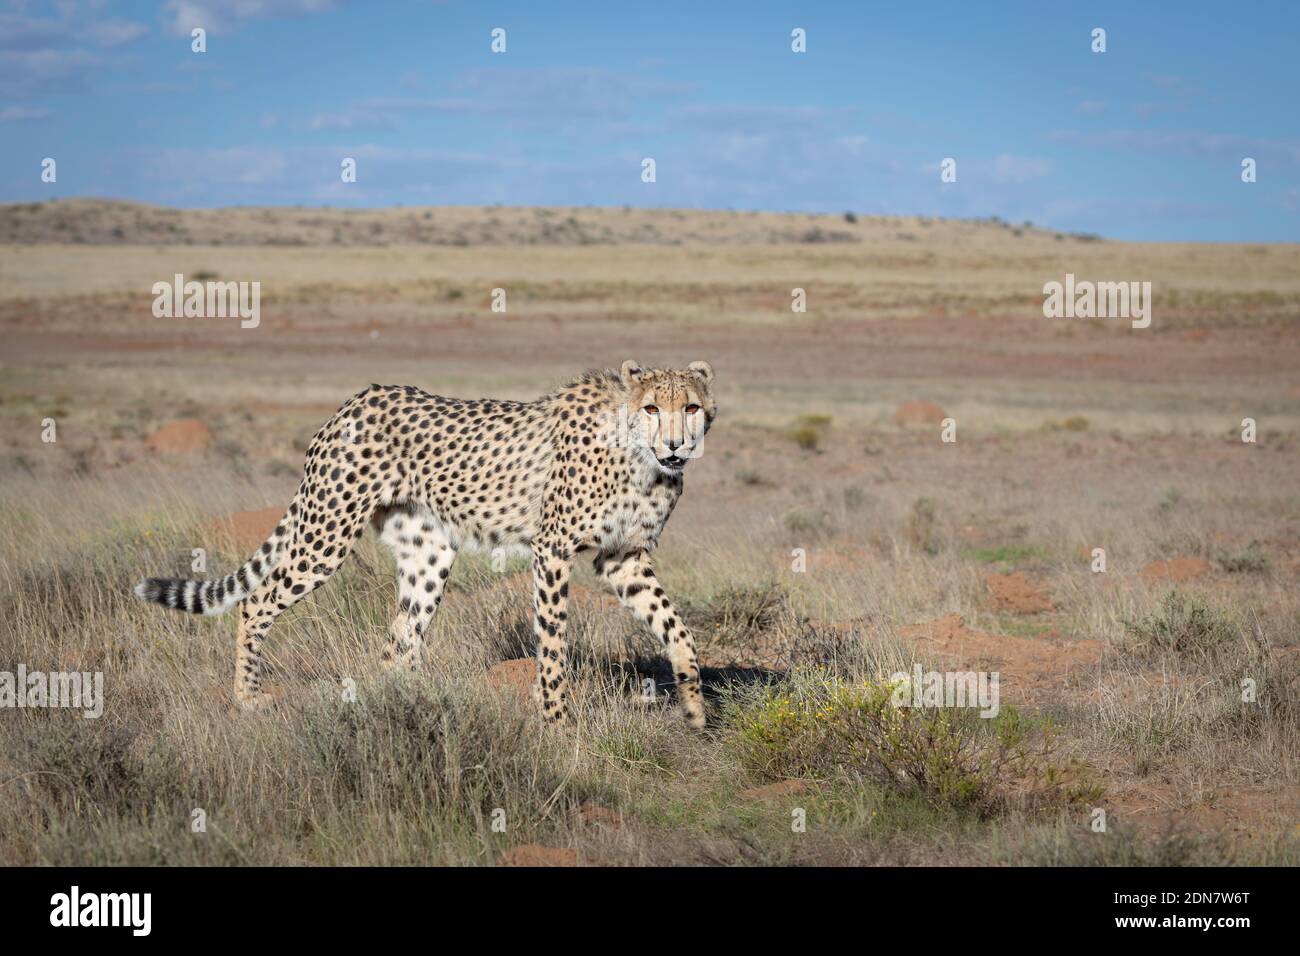 Young cheetah walks across a grassland, with blue sky in the background, low angle perspective Stock Photo